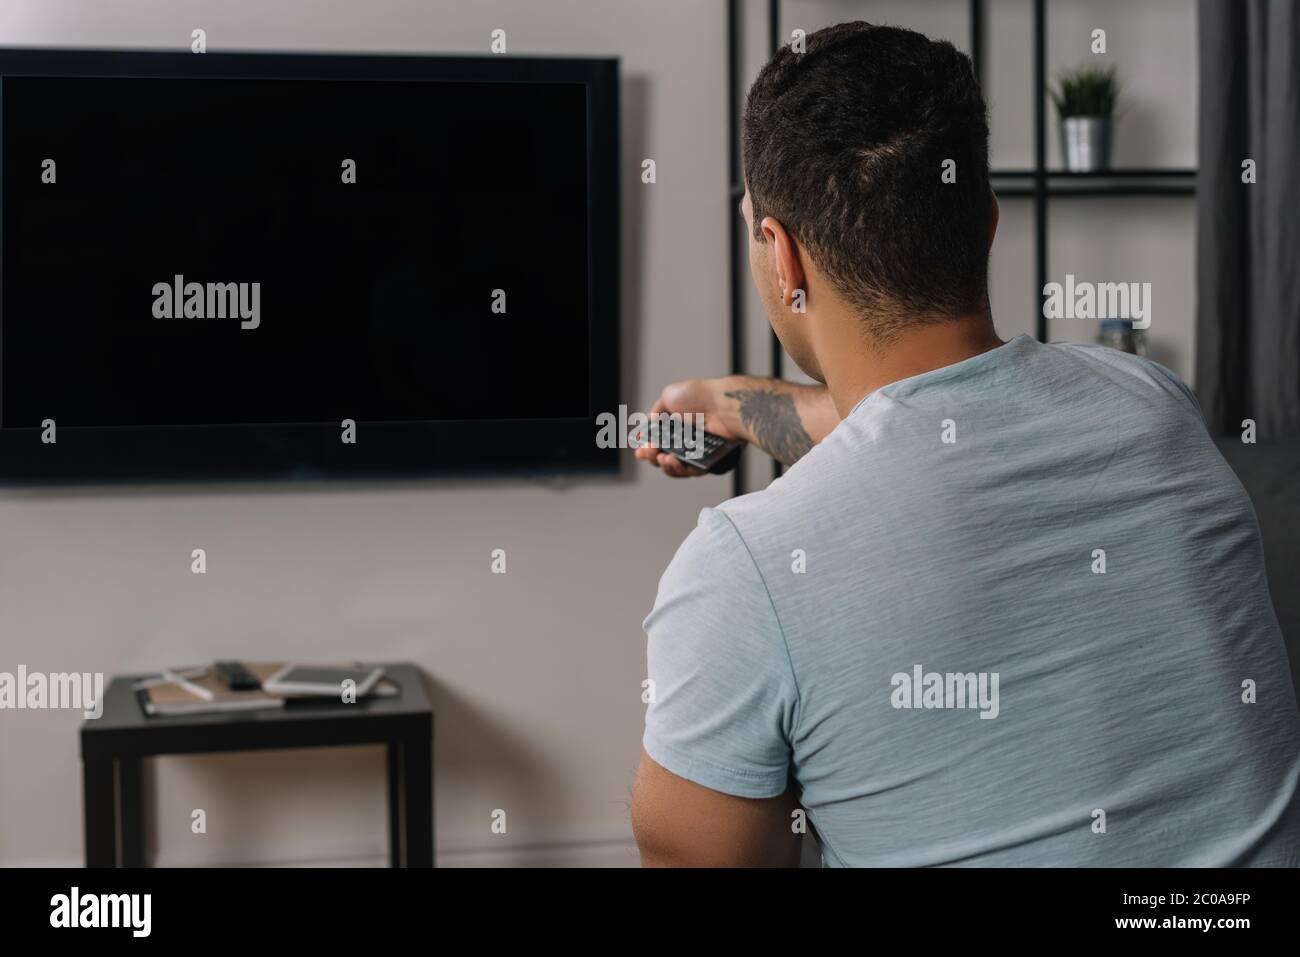 back view of mixed race man holding remote controller near flat panel tv with blank screen Stock Photo